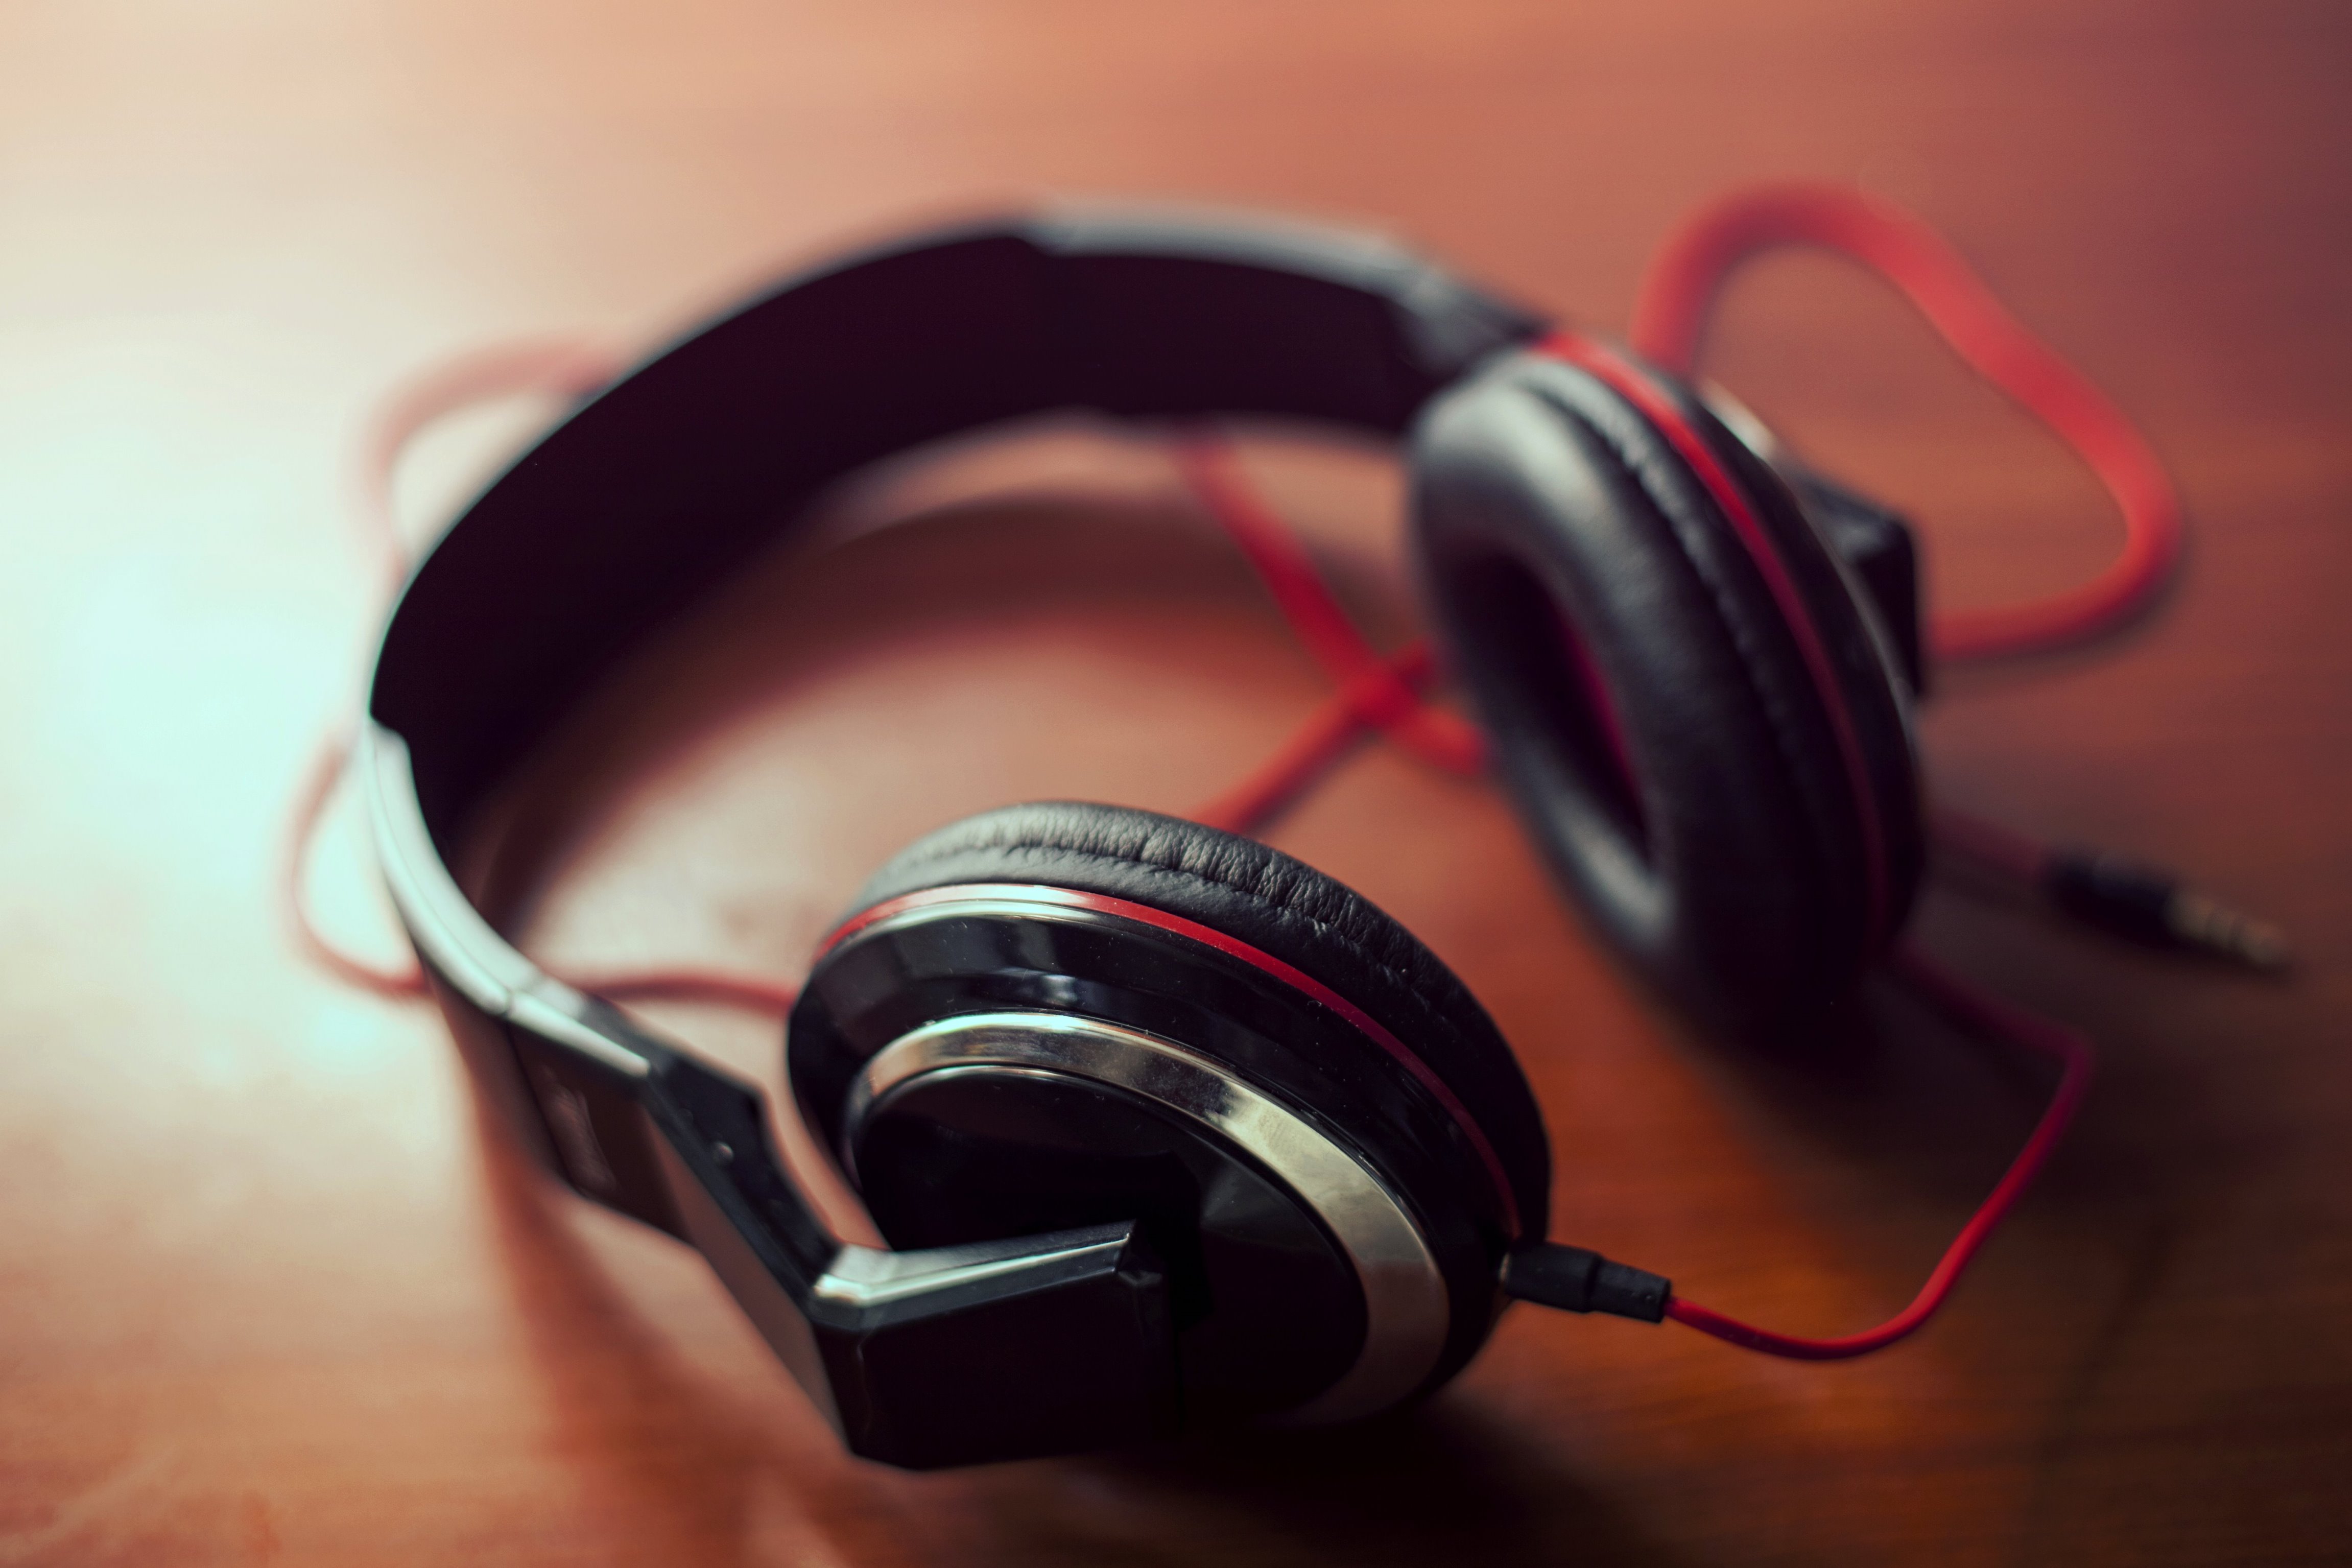 Headphones for listening to stress relief music